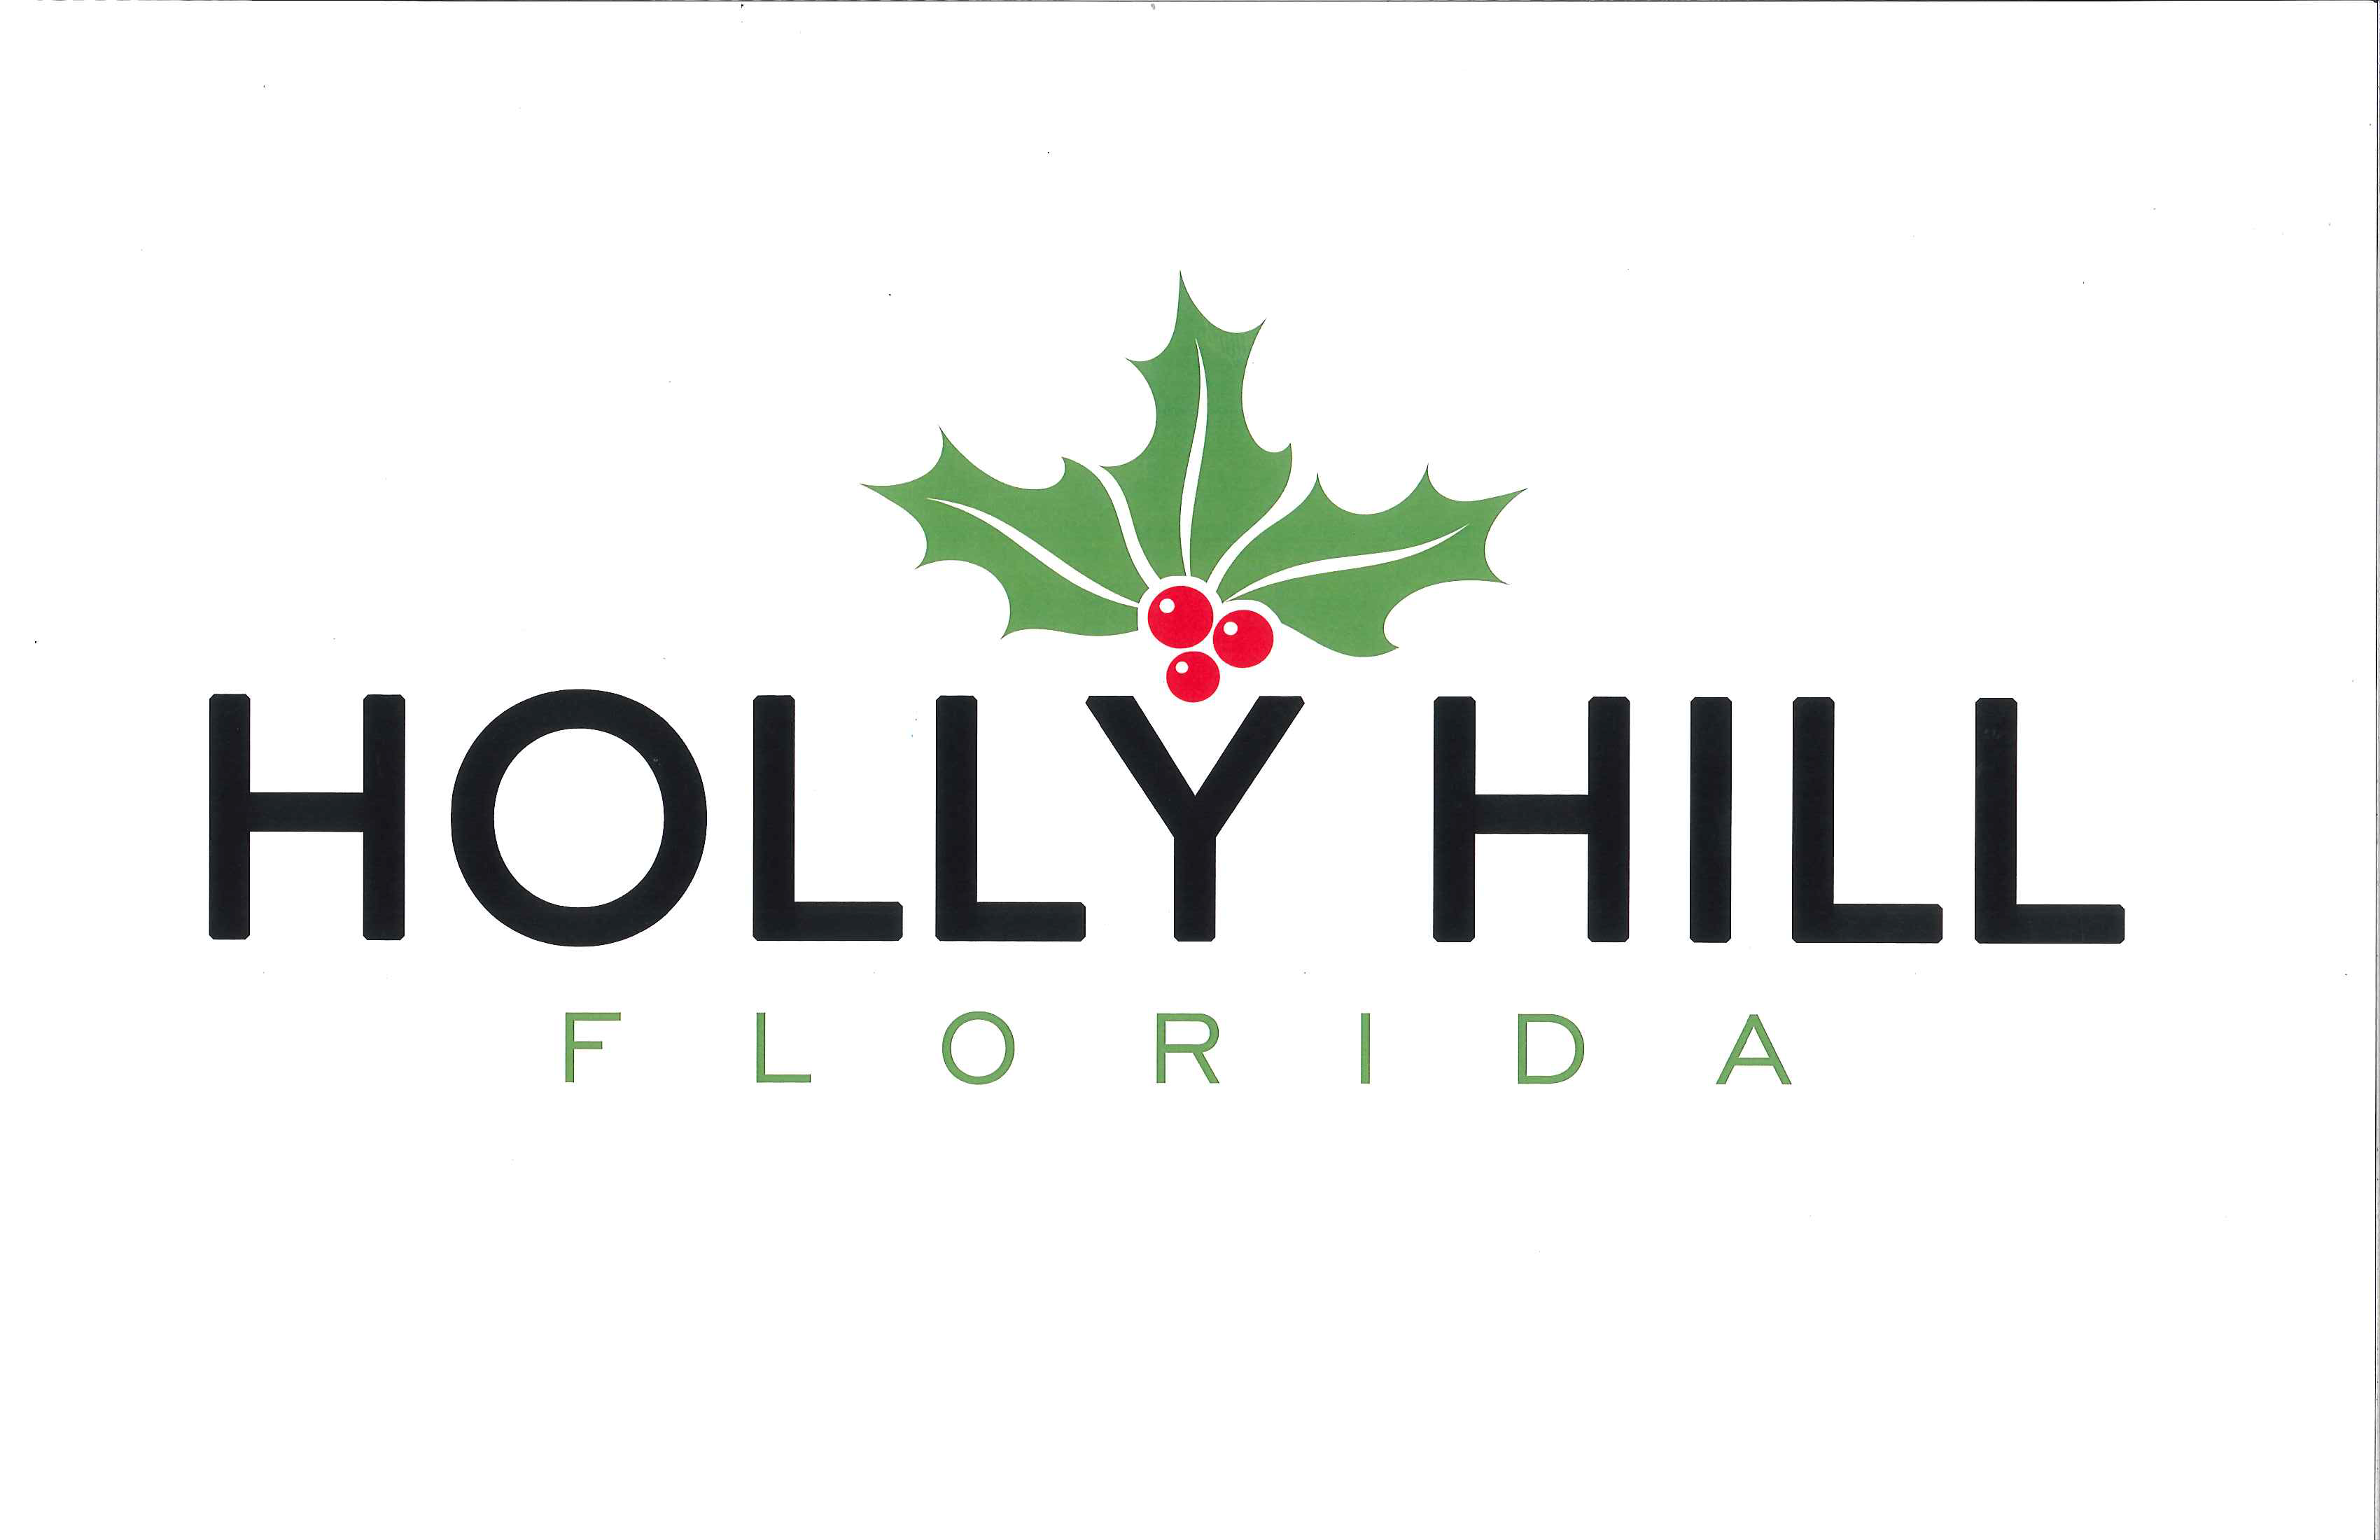 City of Holly Hill